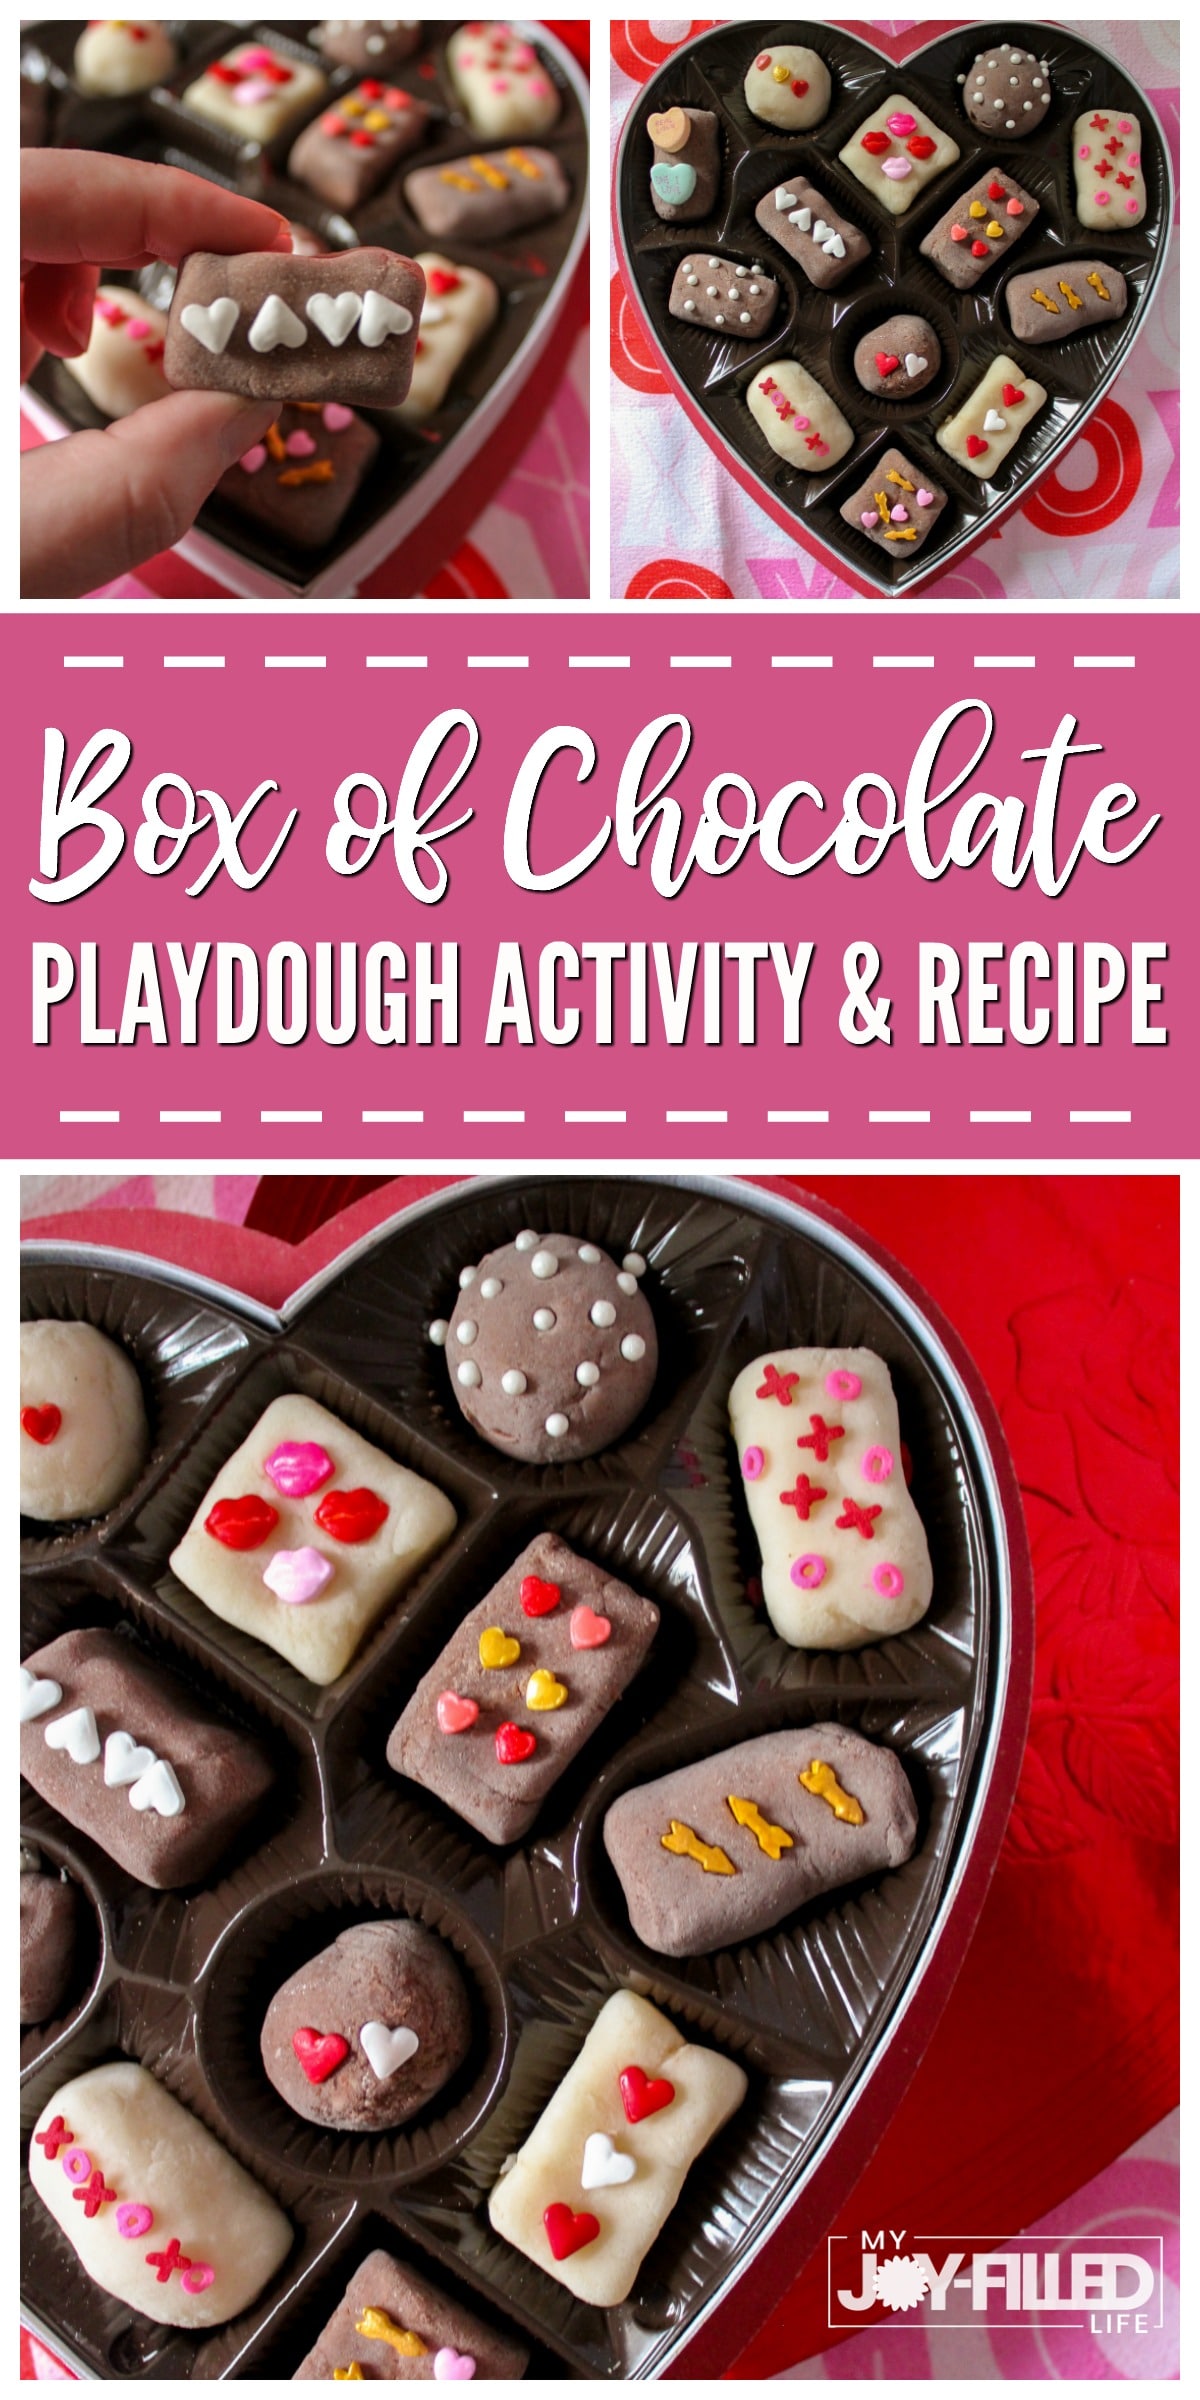 Kids will have so much fun with this box of chocolate playdough activity and recipe. It's sure to spark your child's imagination and creativity. #playdough #sensoryplay #pretendplay